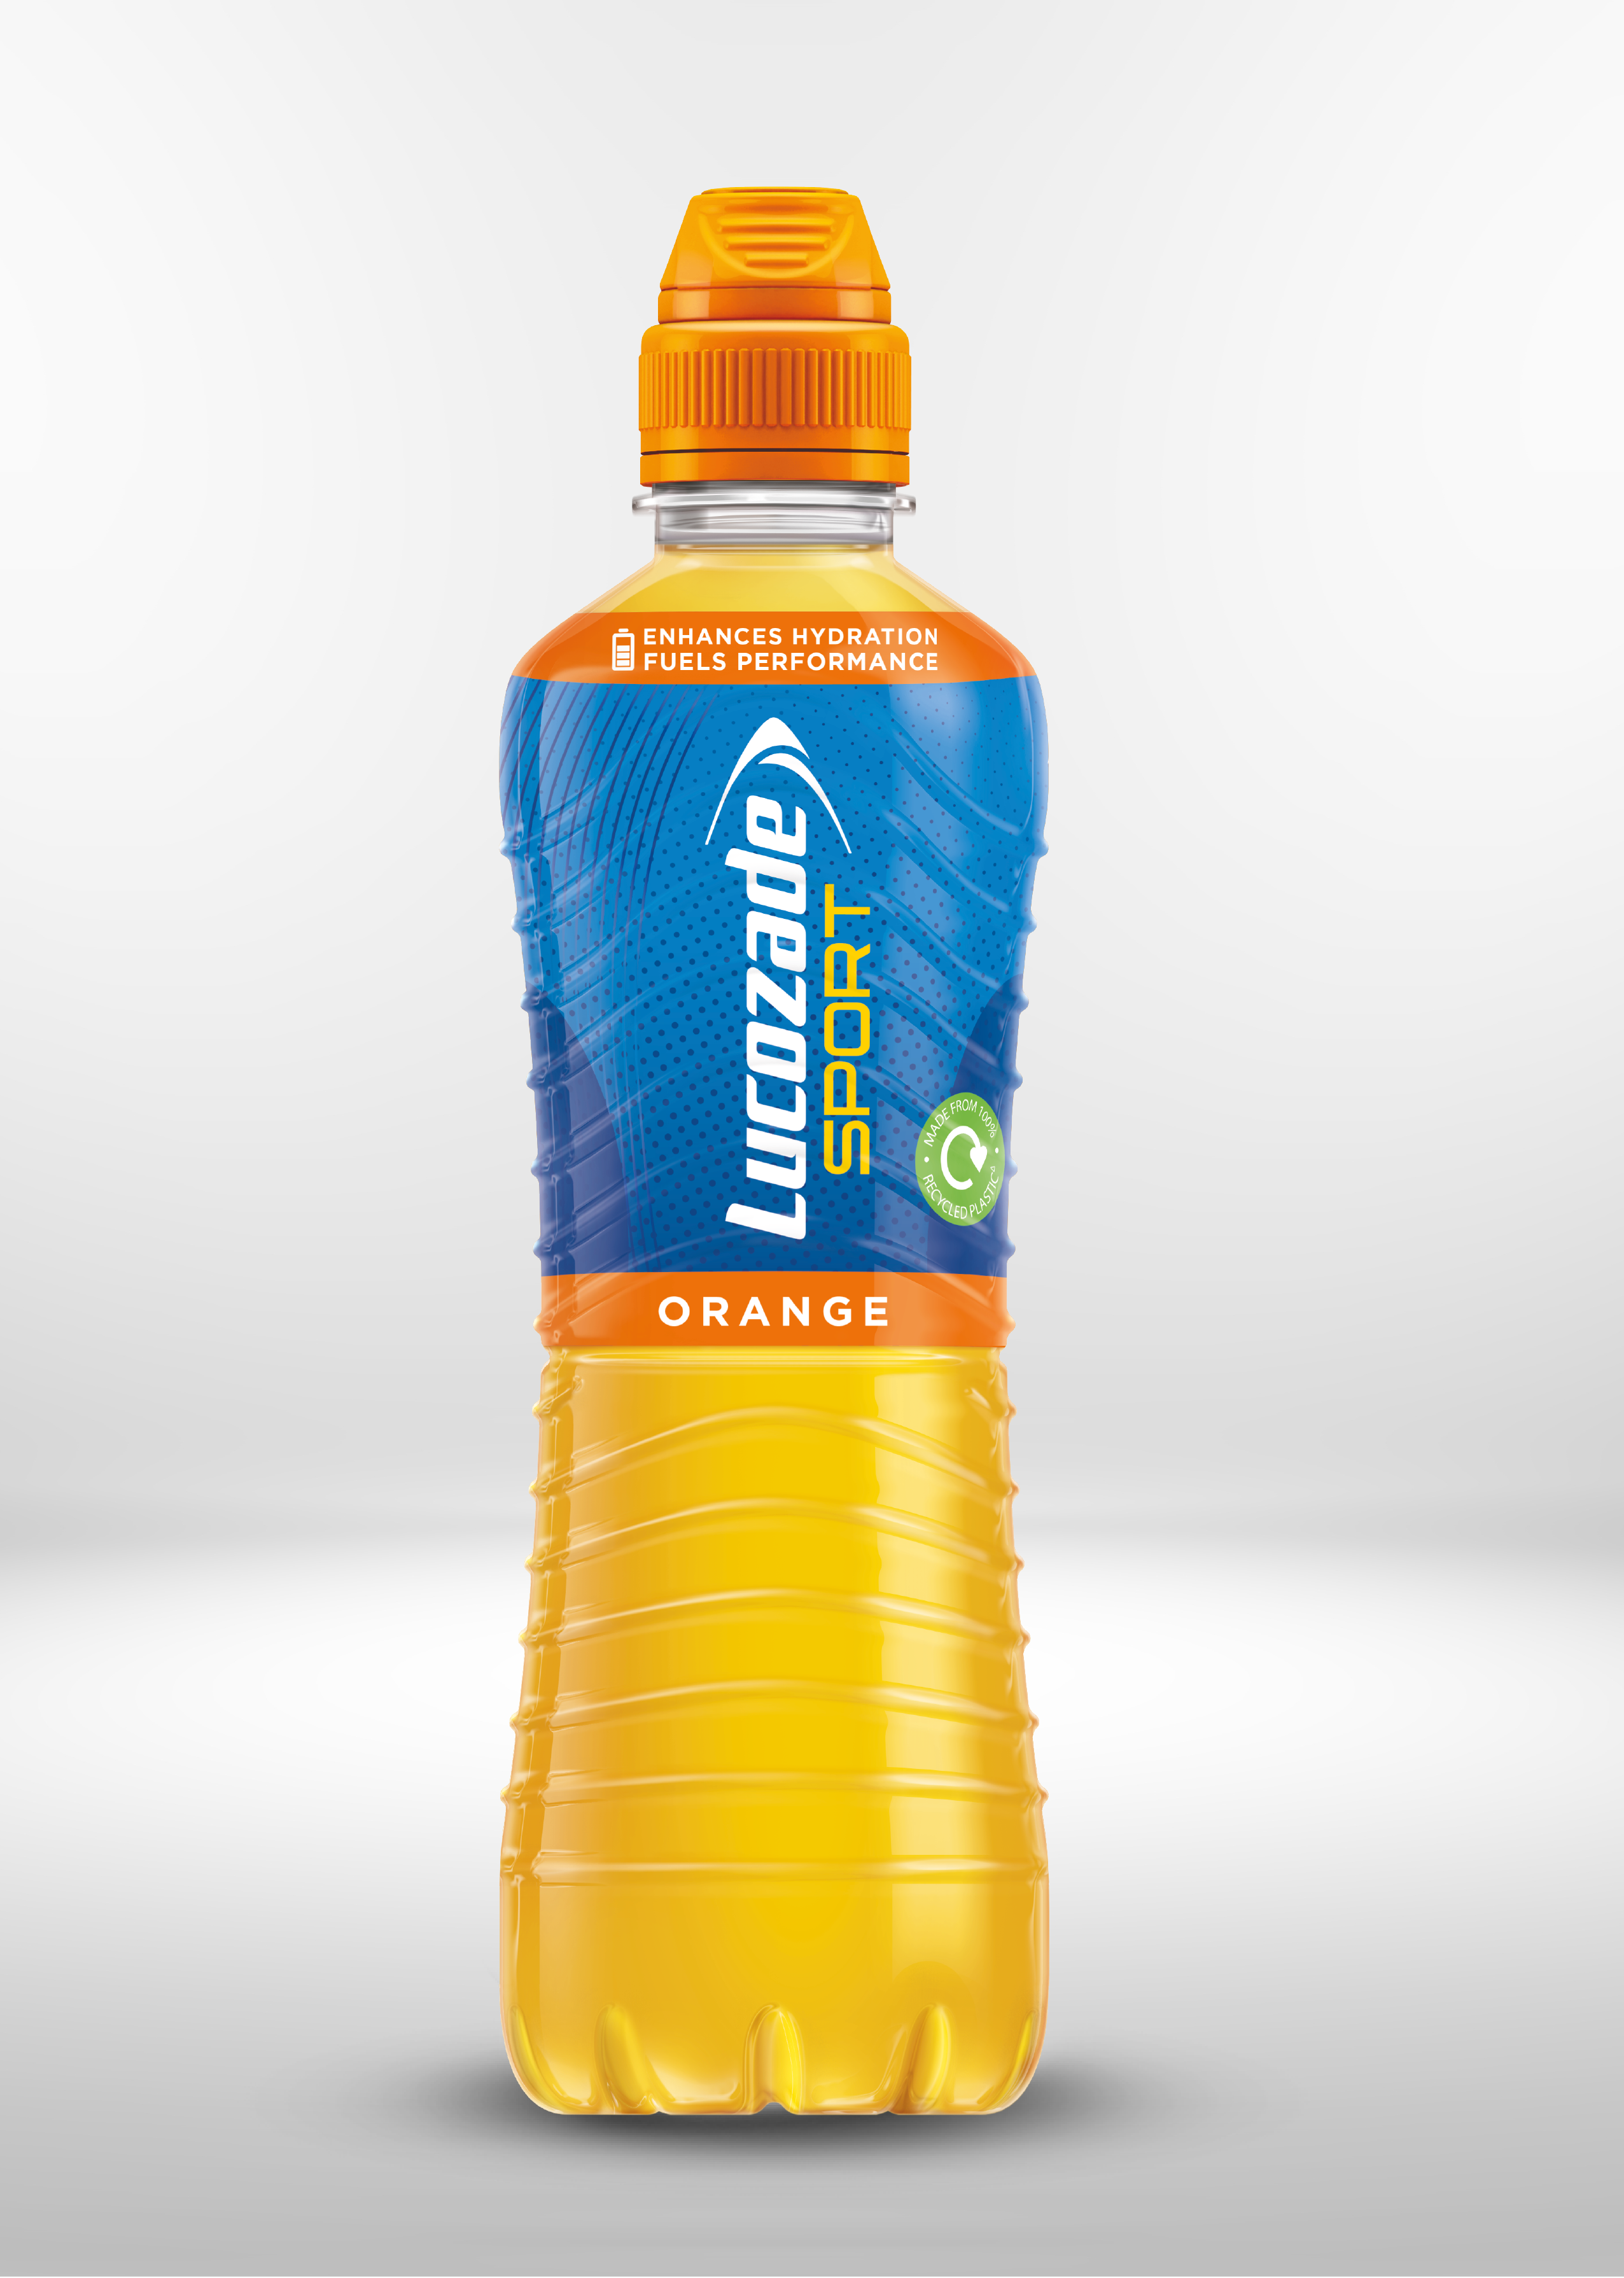 SBF GB&I invests £6M in Lucozade recycling